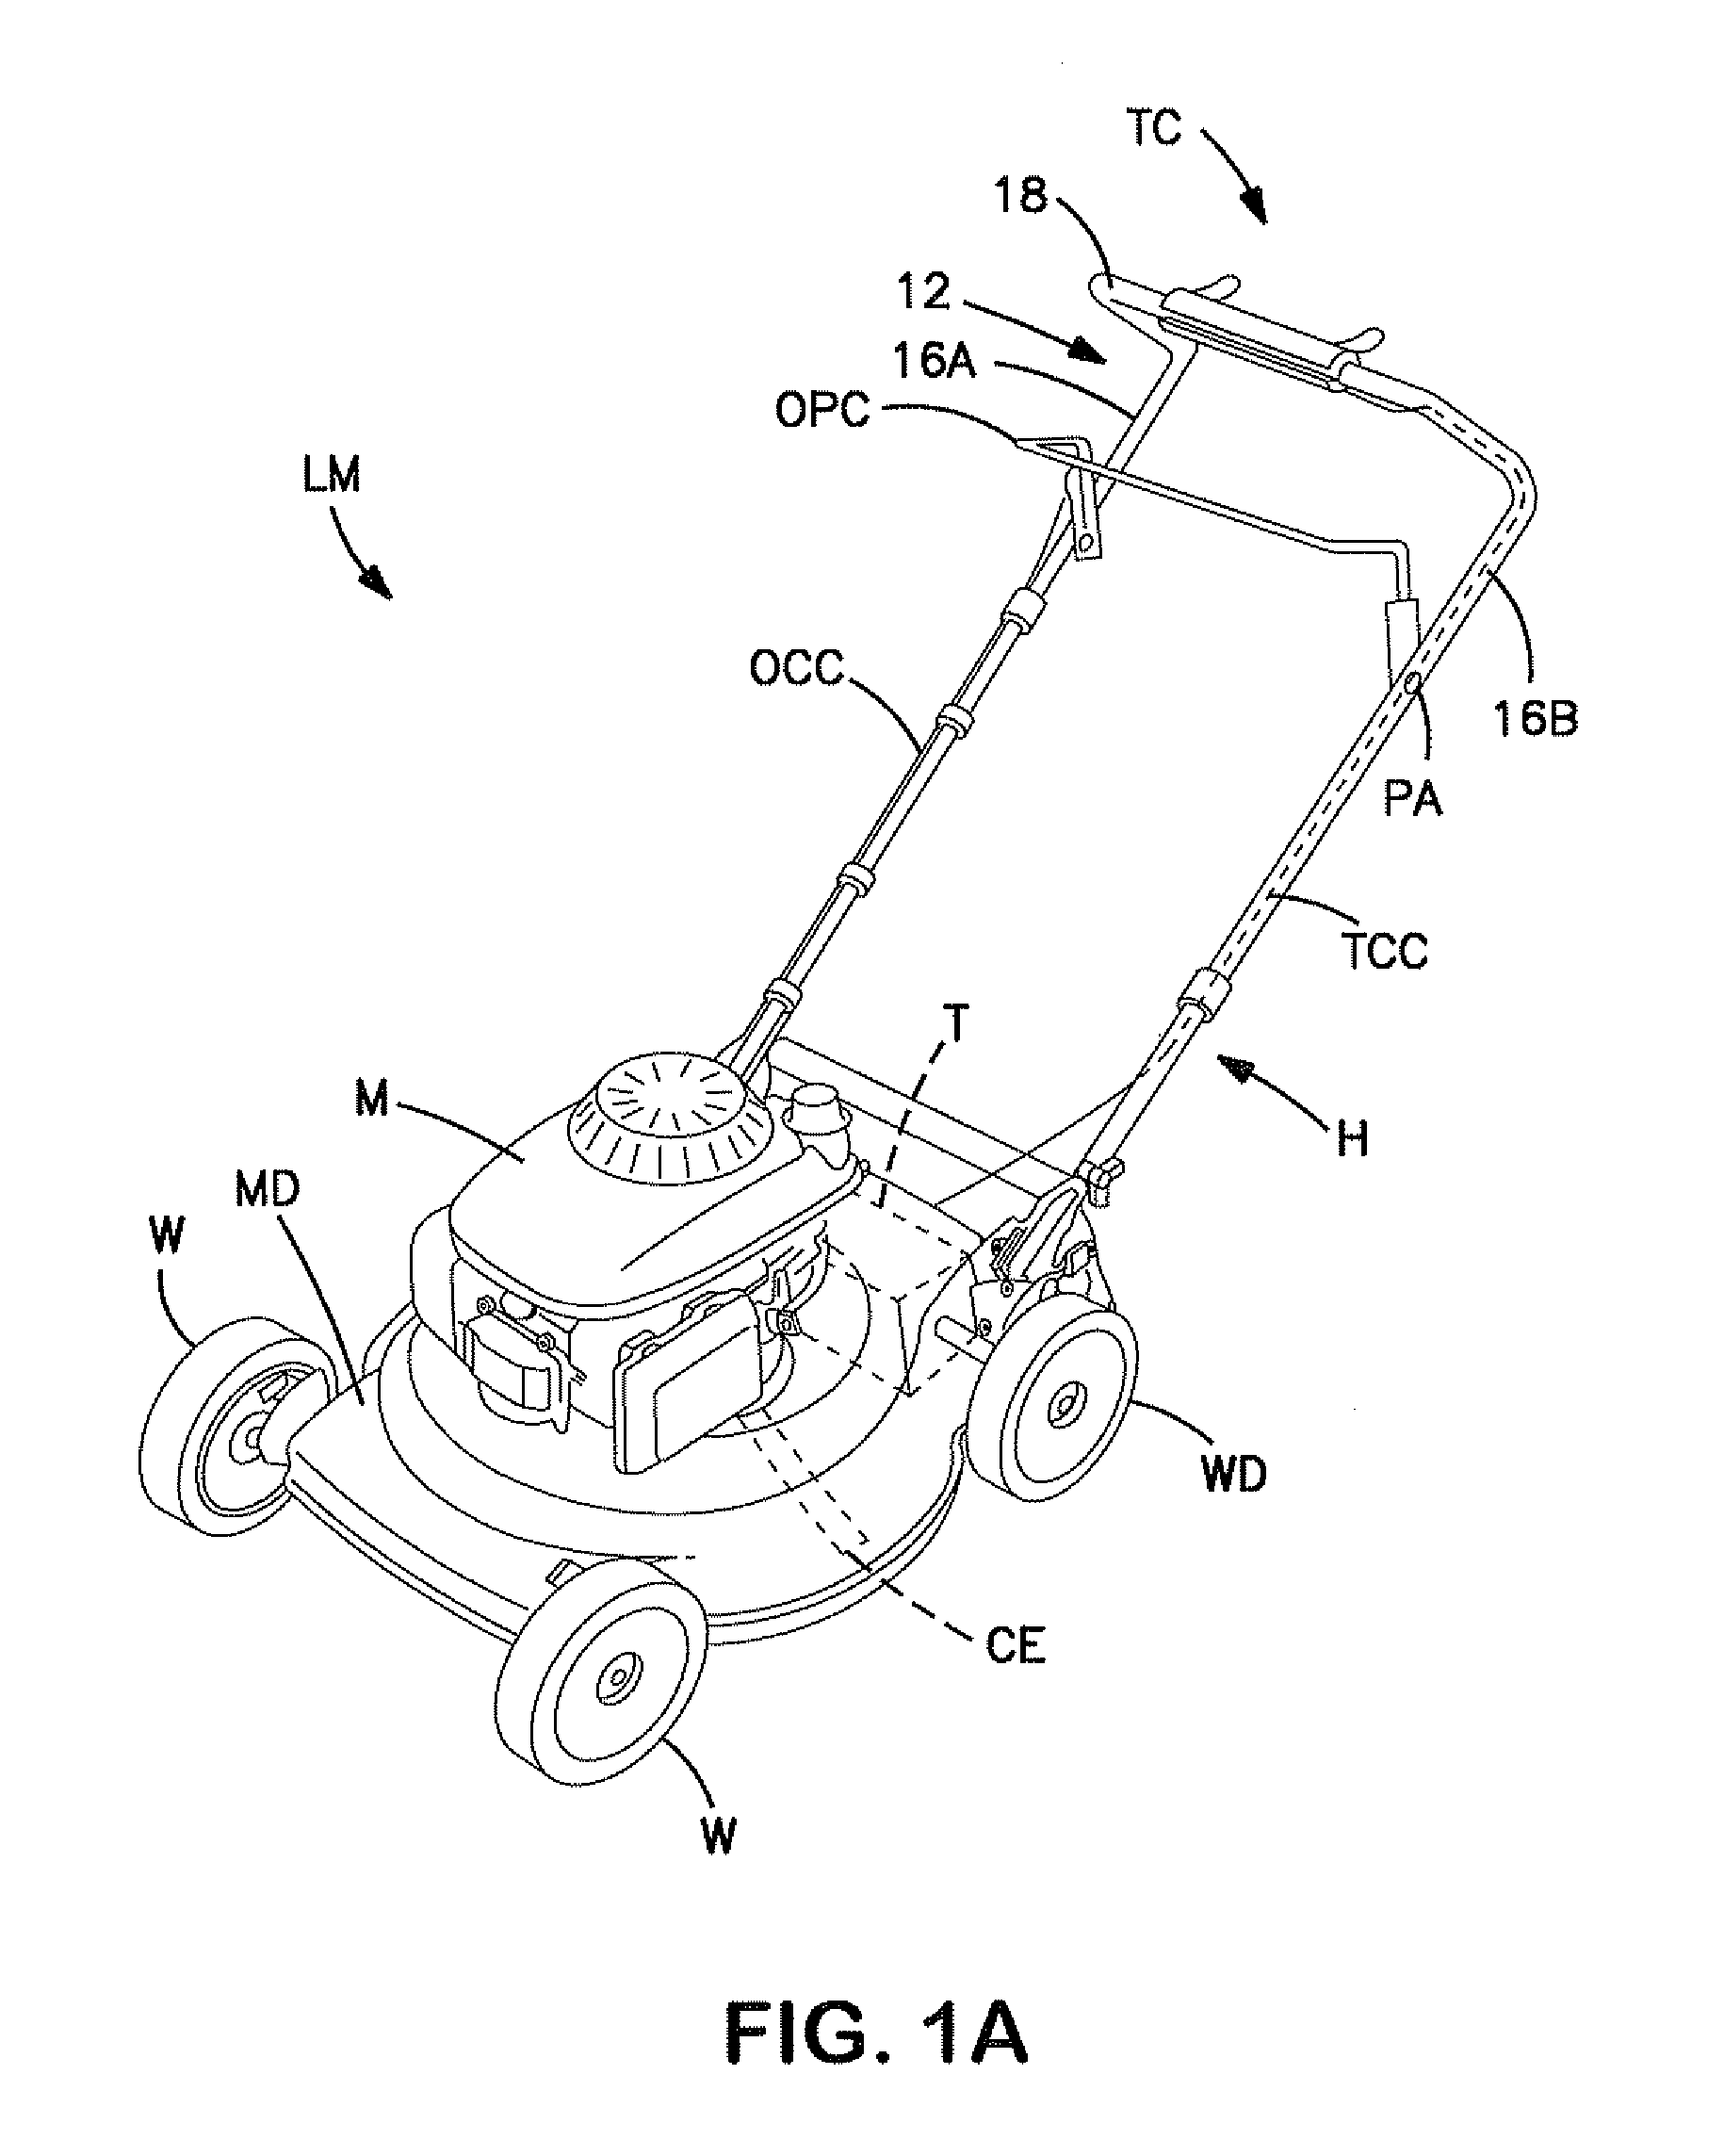 Variable speed transmission twist-grip throttle control apparatuses and methods for self-propelled mowing machine